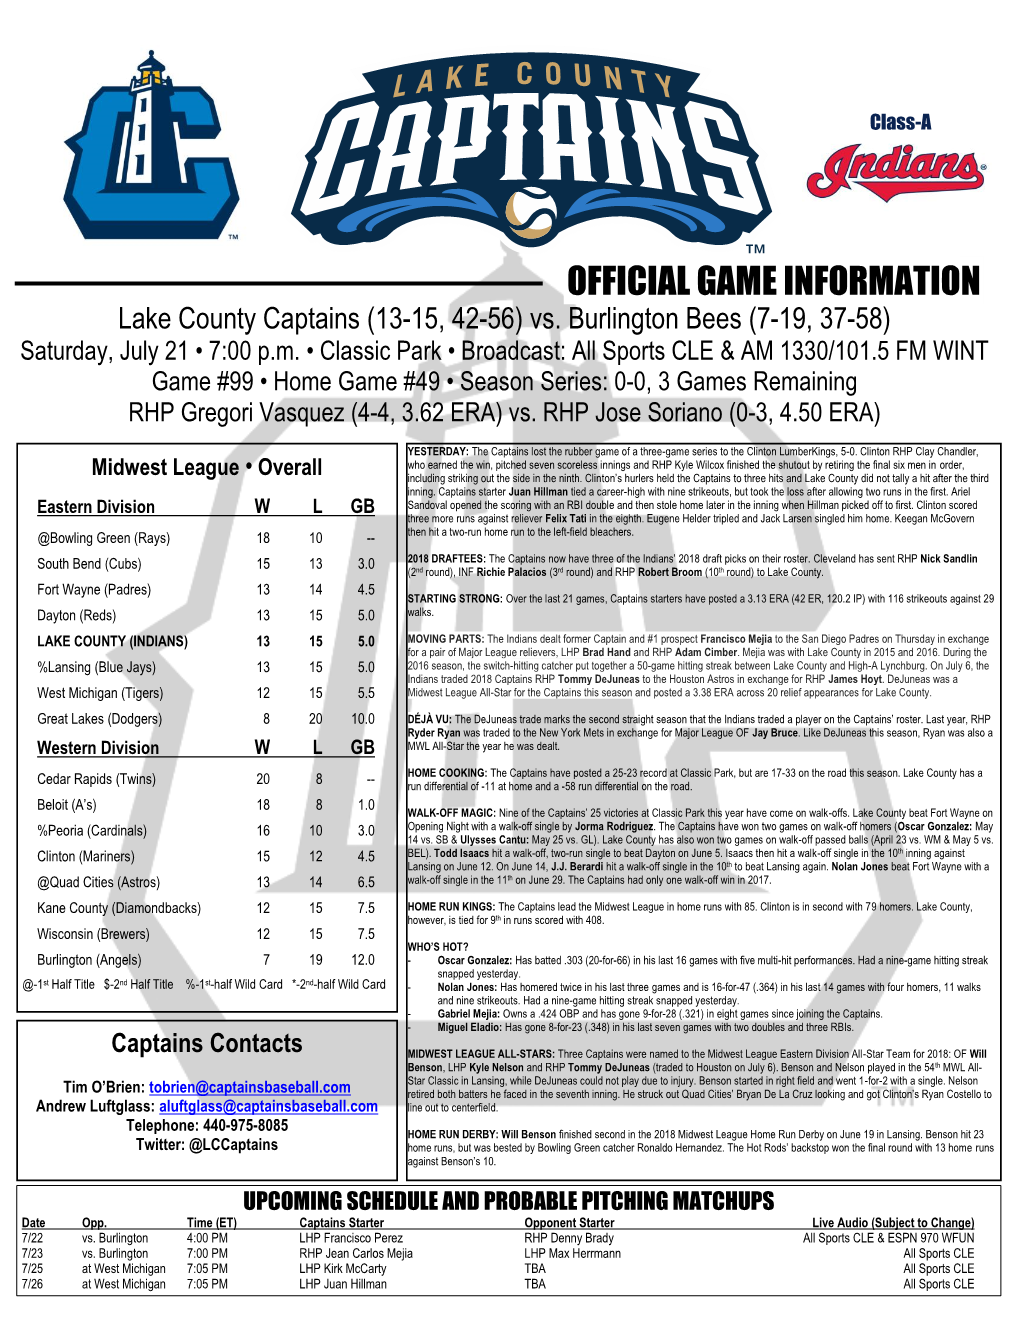 OFFICIAL GAME INFORMATION Lake County Captains (13-15, 42-56) Vs